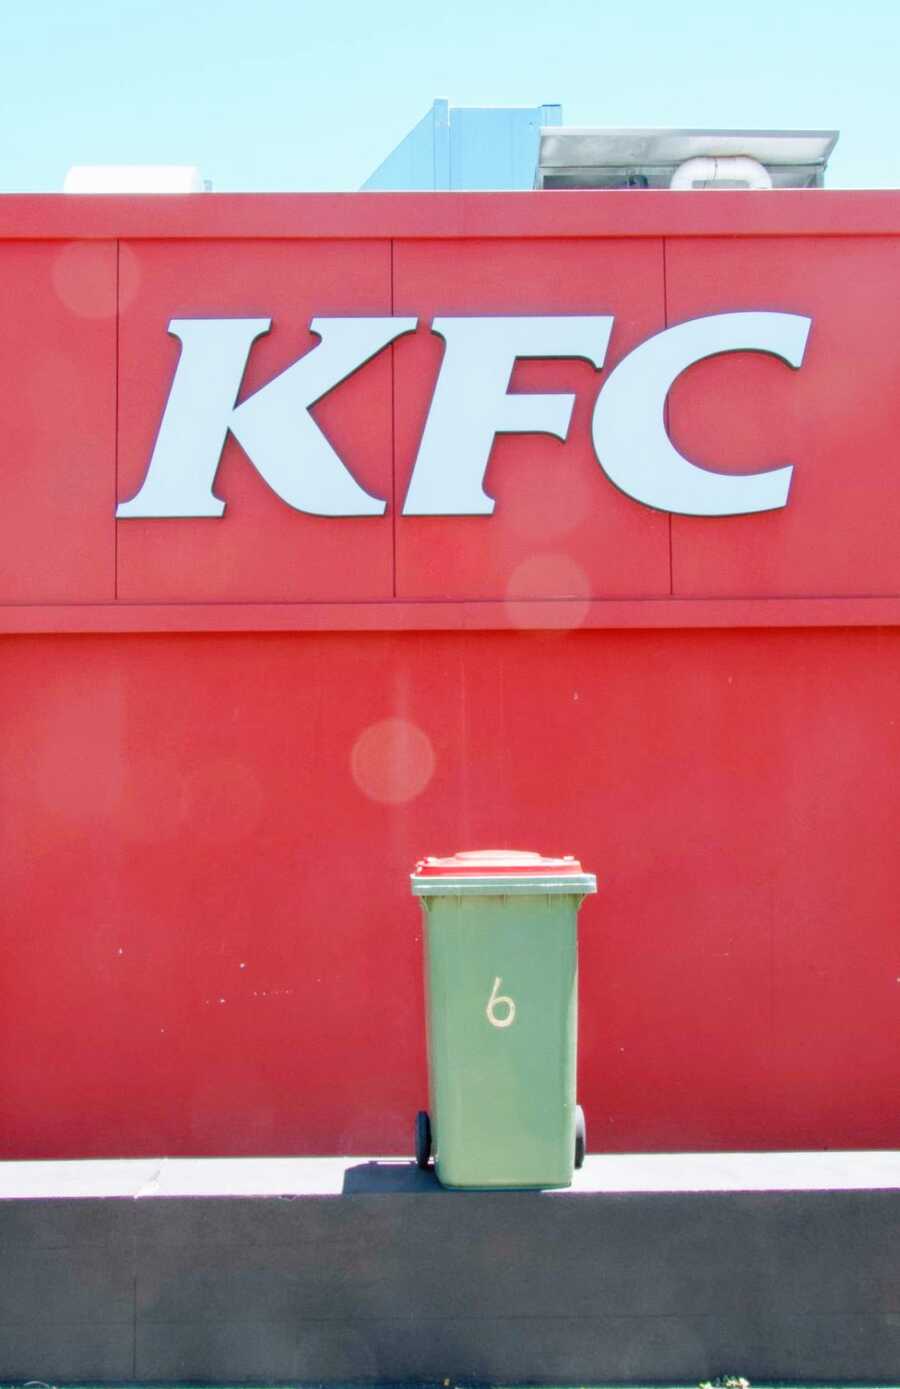 garbage can is brought to and placed in front of a KFC restaurant